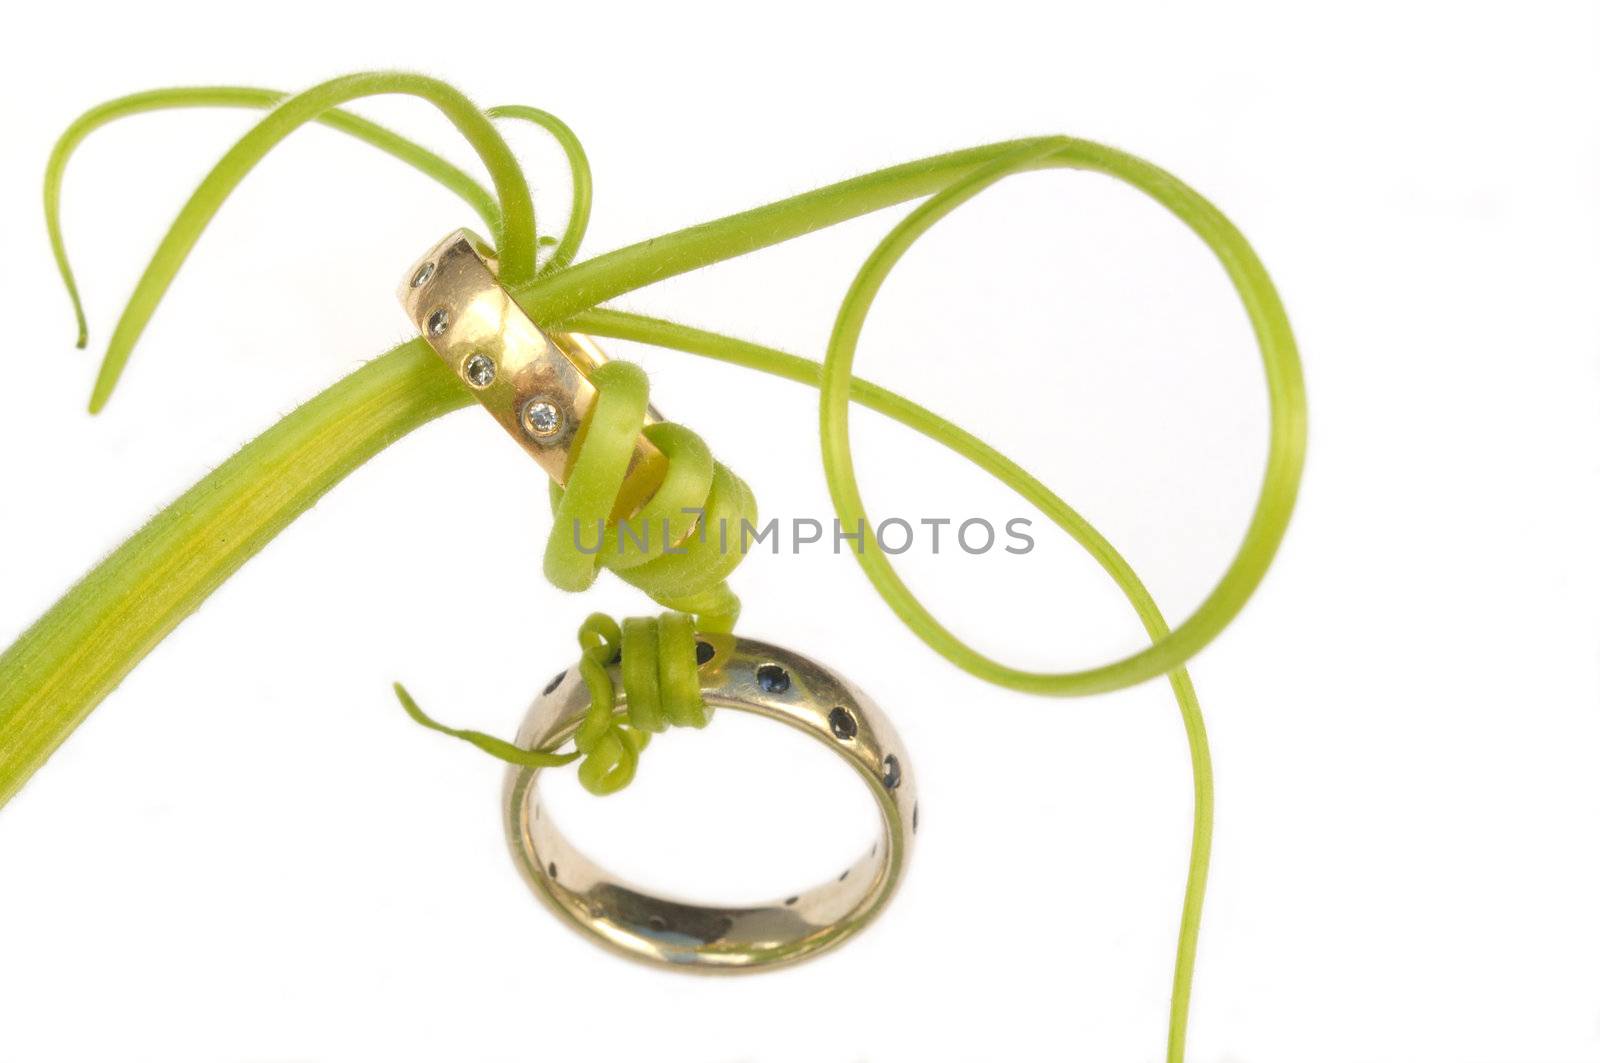 two wedding rings, one yellow gold with diamonds and the other white gold with blue sapphires, are bound together with green vine tendrils